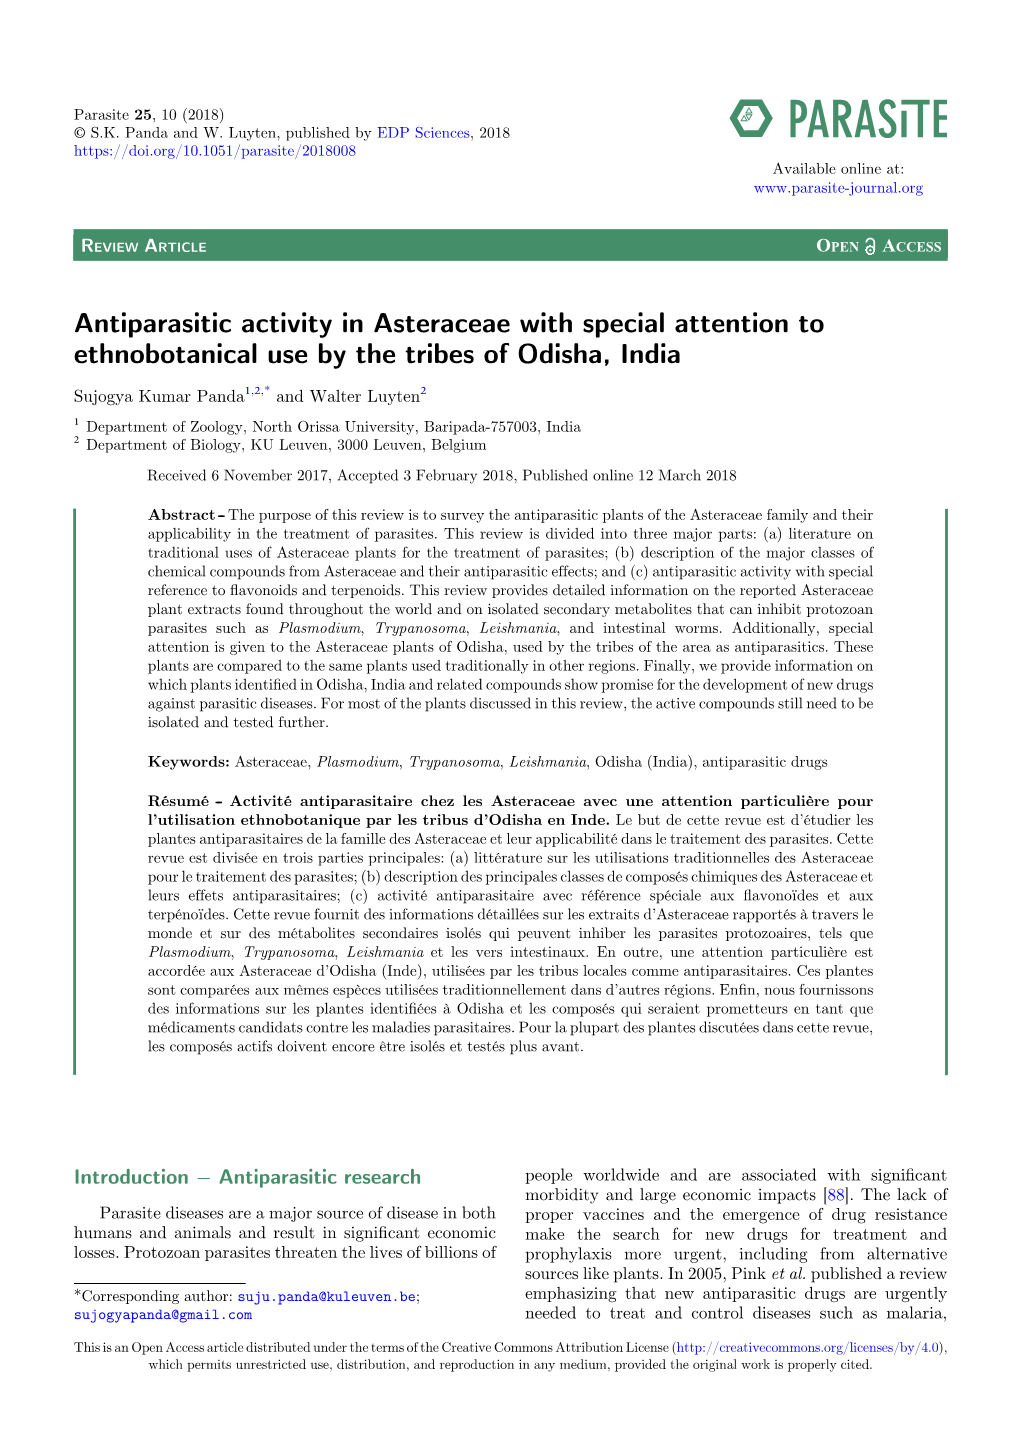 Antiparasitic Activity in Asteraceae with Special Attention to Ethnobotanical Use by the Tribes of Odisha, India